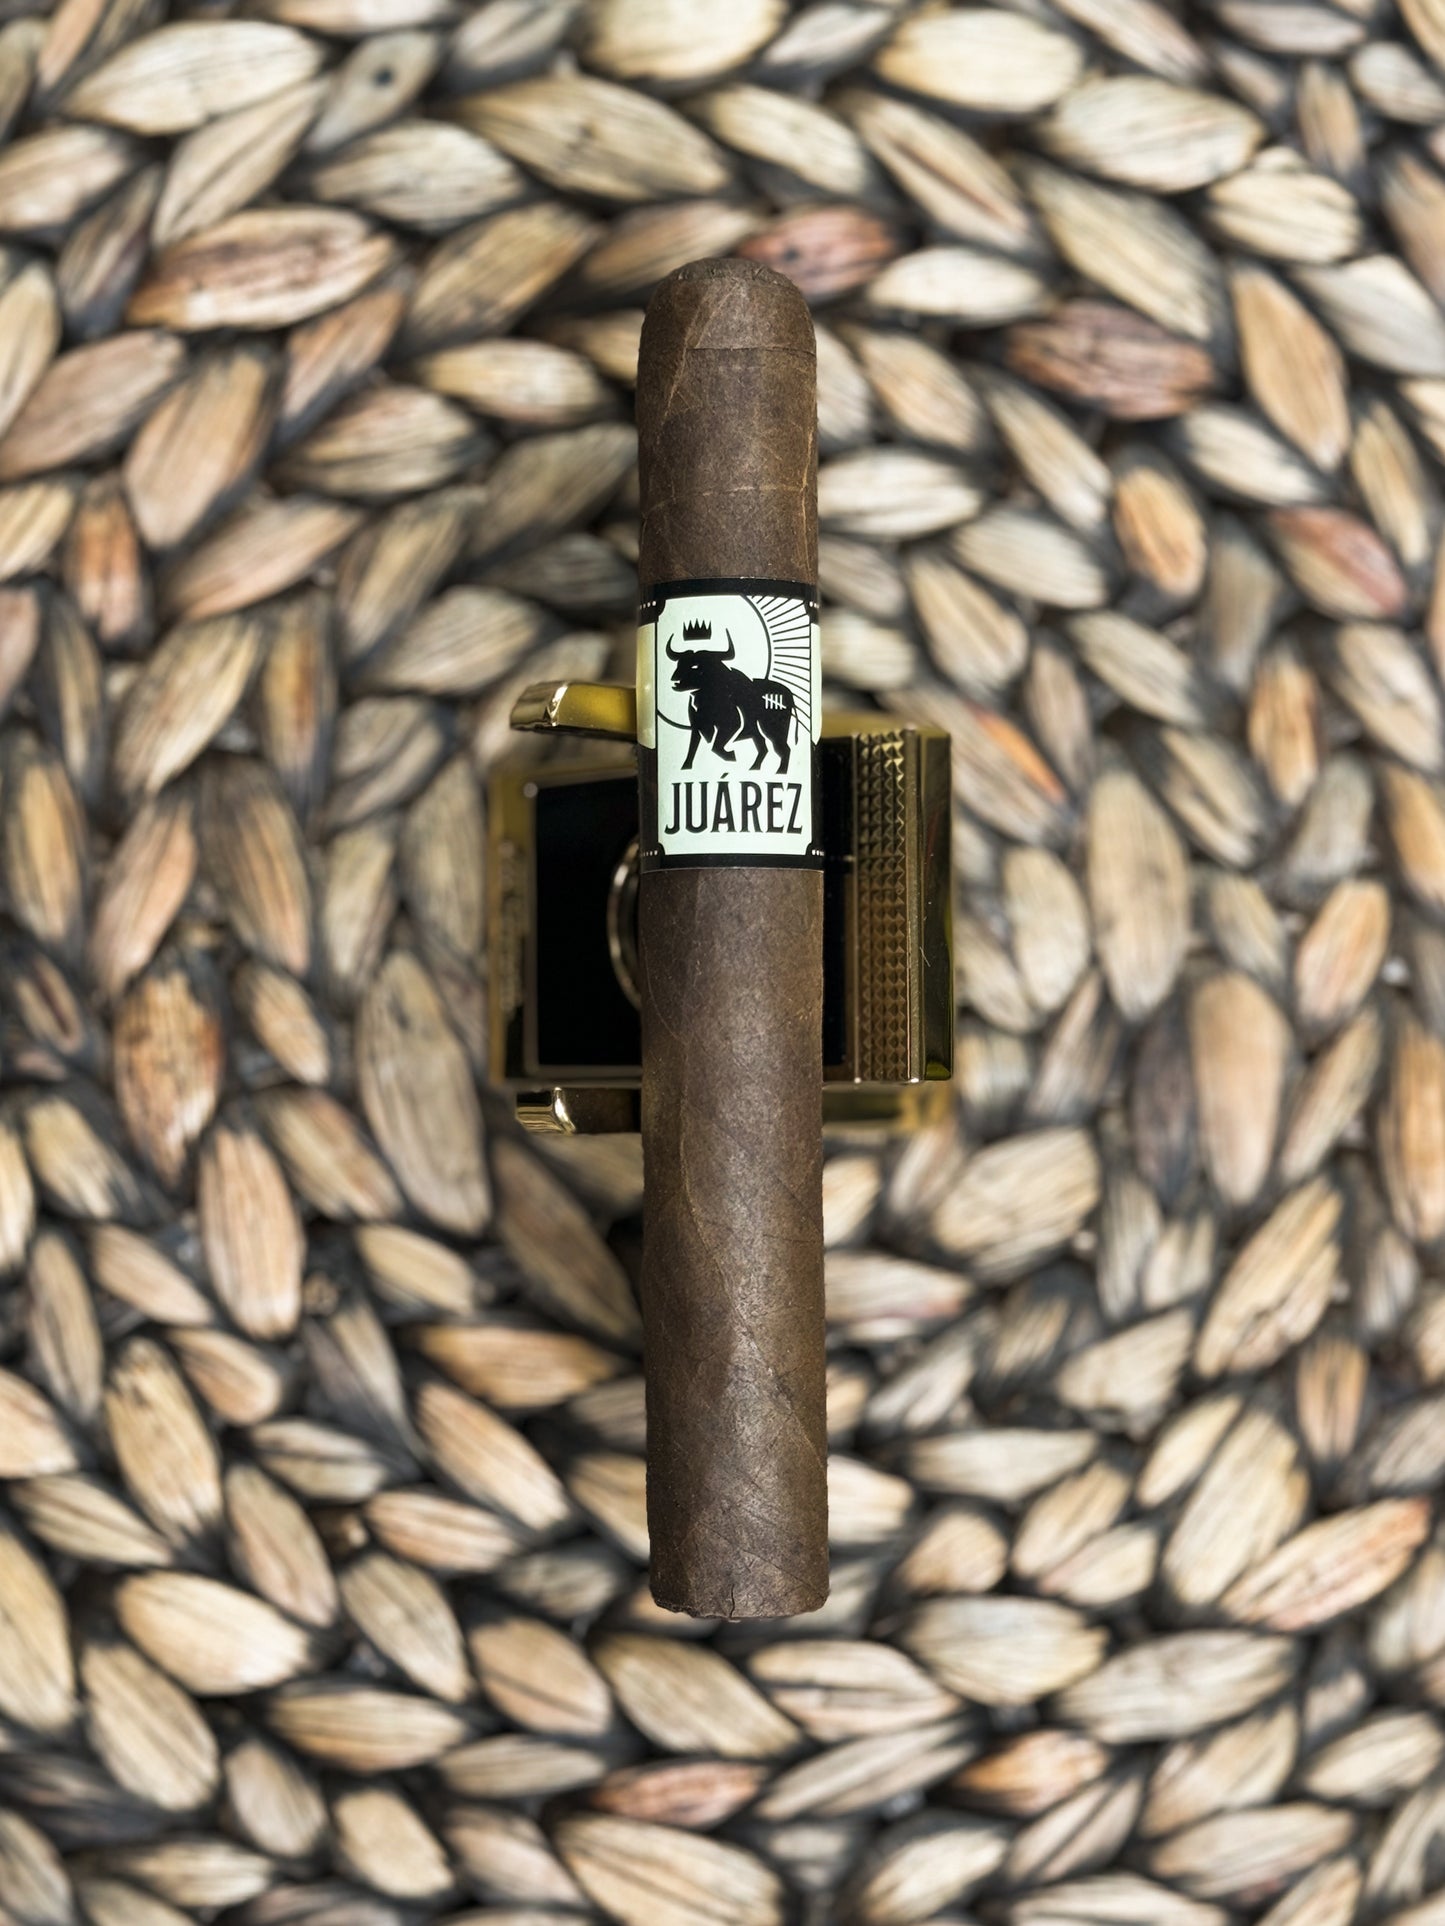 Juarez by Crowned Heads in Chihuahua